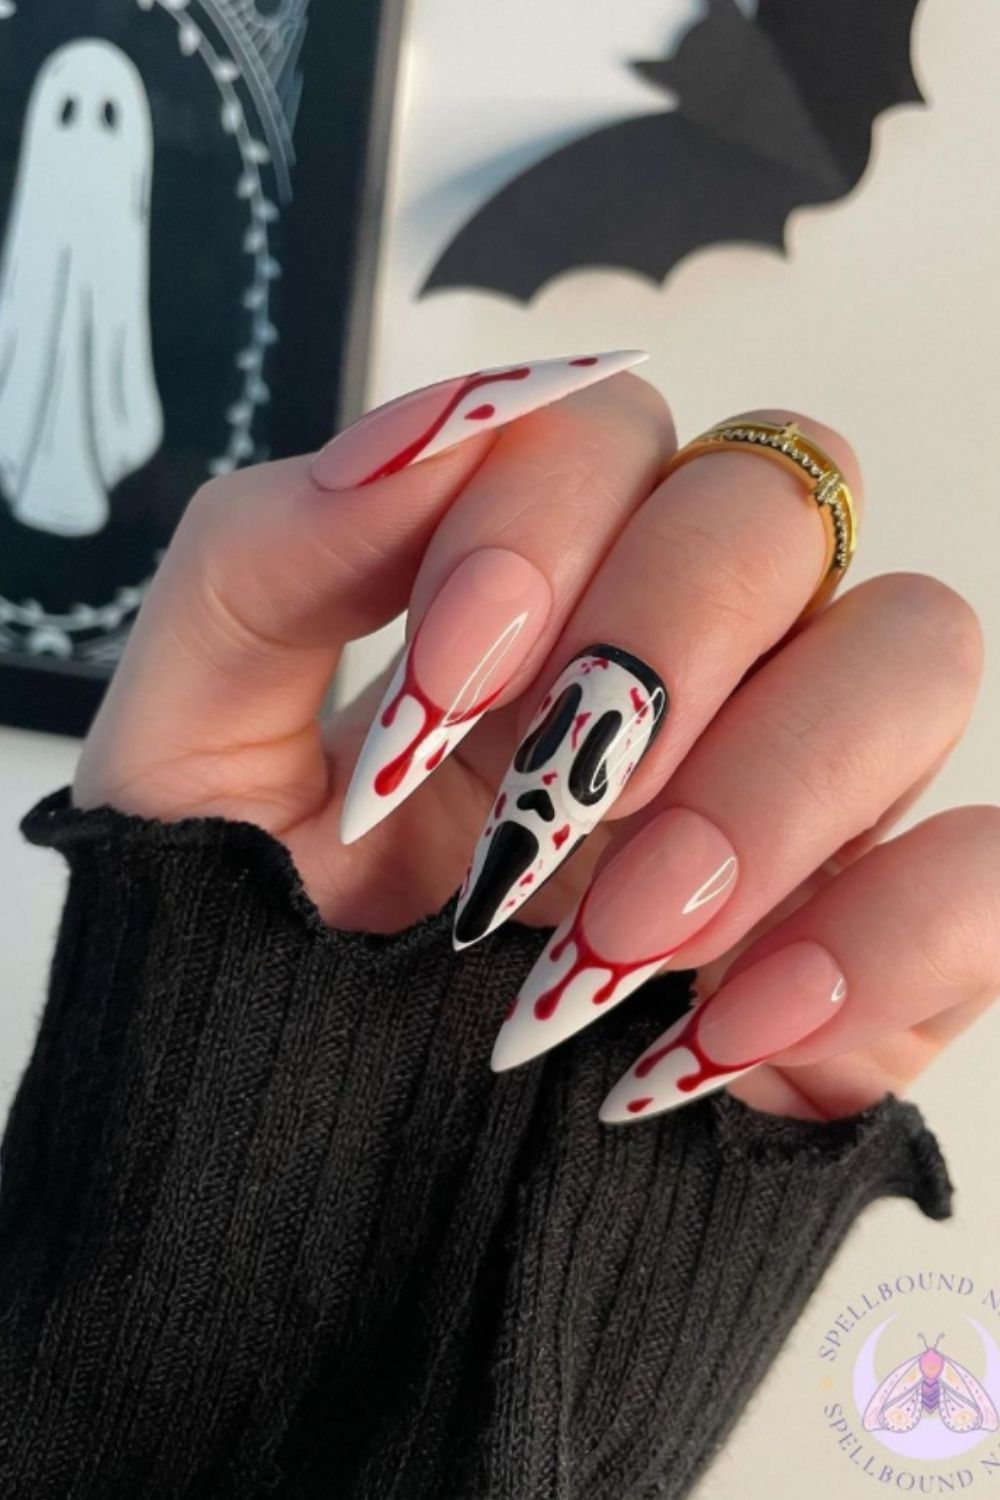 Bloody Nail Designs – With Blood Drops, Wounds, Knives